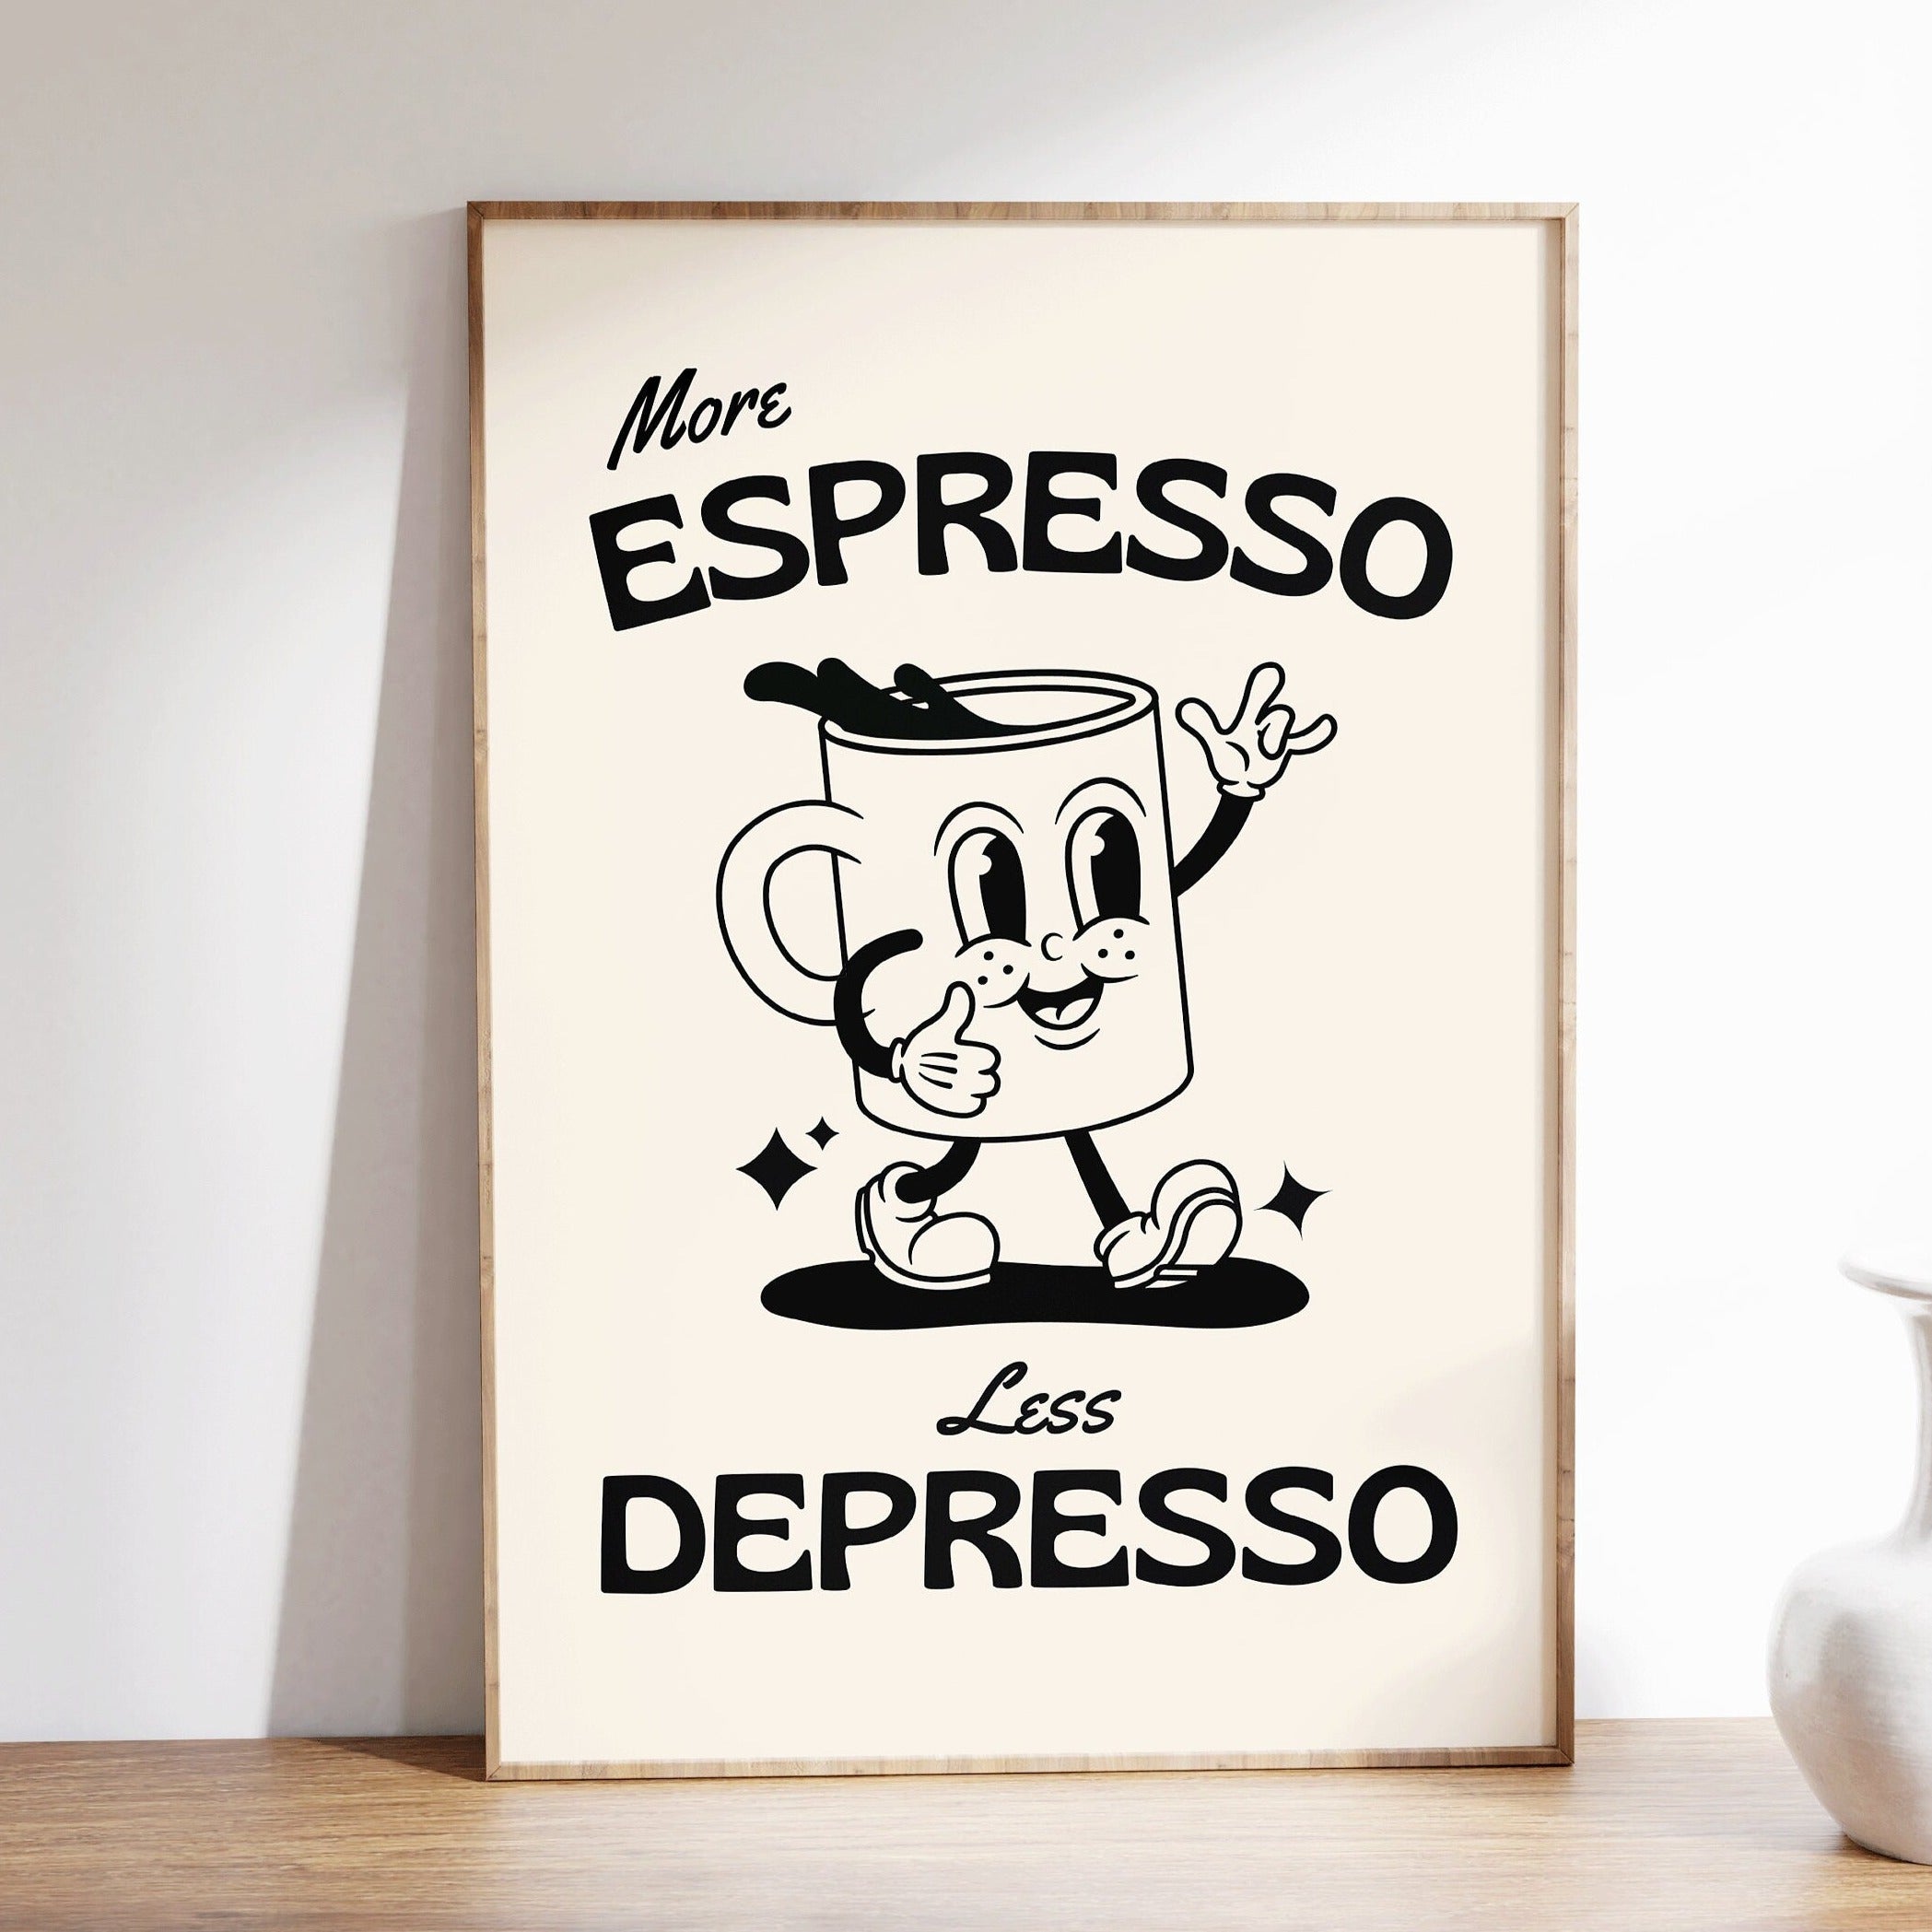 Retro Quote Wall Print, More Espresso Wall Decor, Coffee Bar Cart Art Print, Kitchen Office Wall Poster, Beige and Black, UNFRAMED